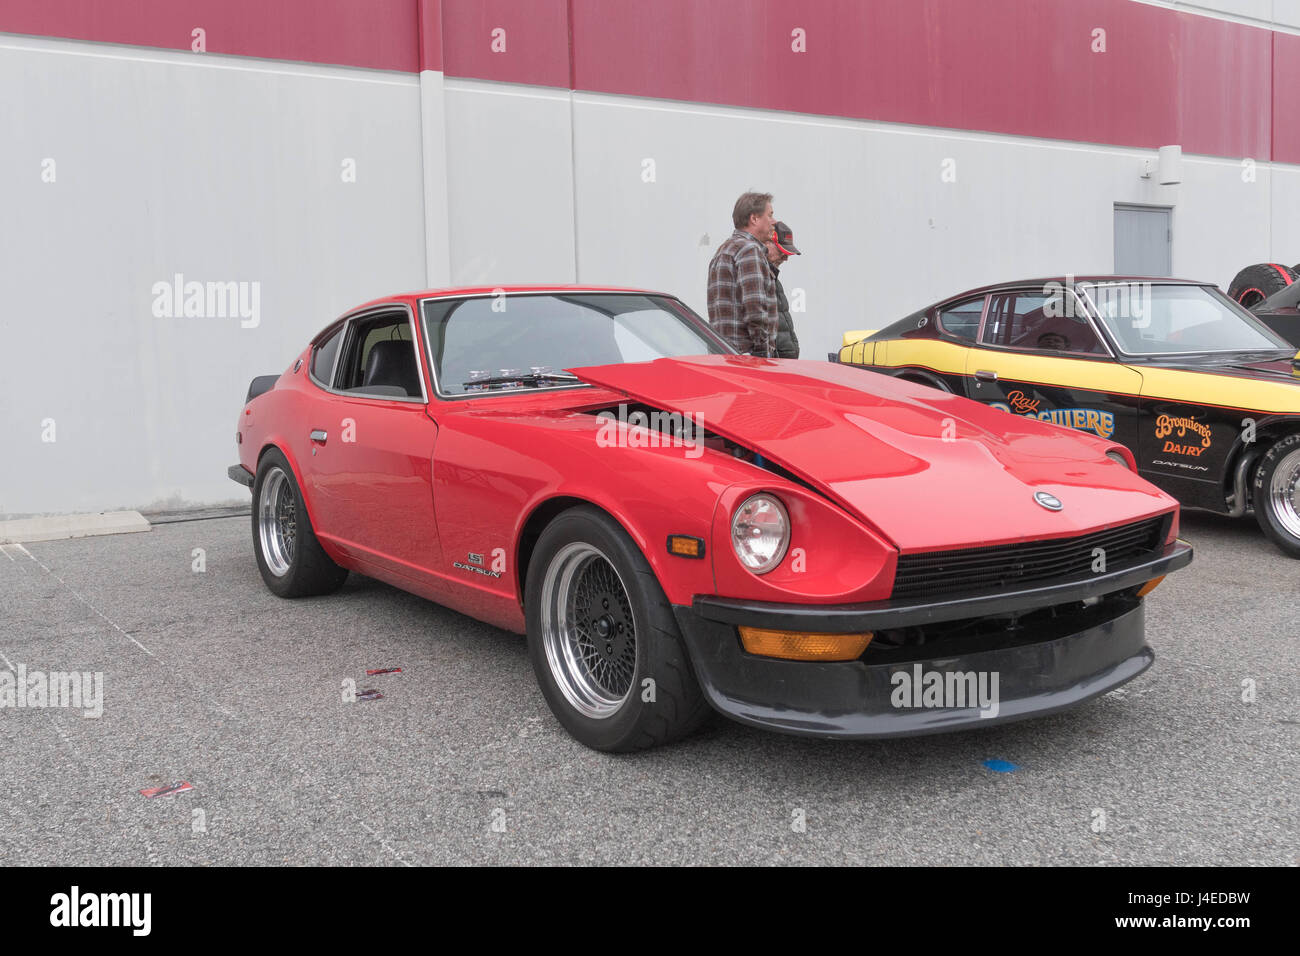 280zx High Resolution Stock Photography and Images - Alamy